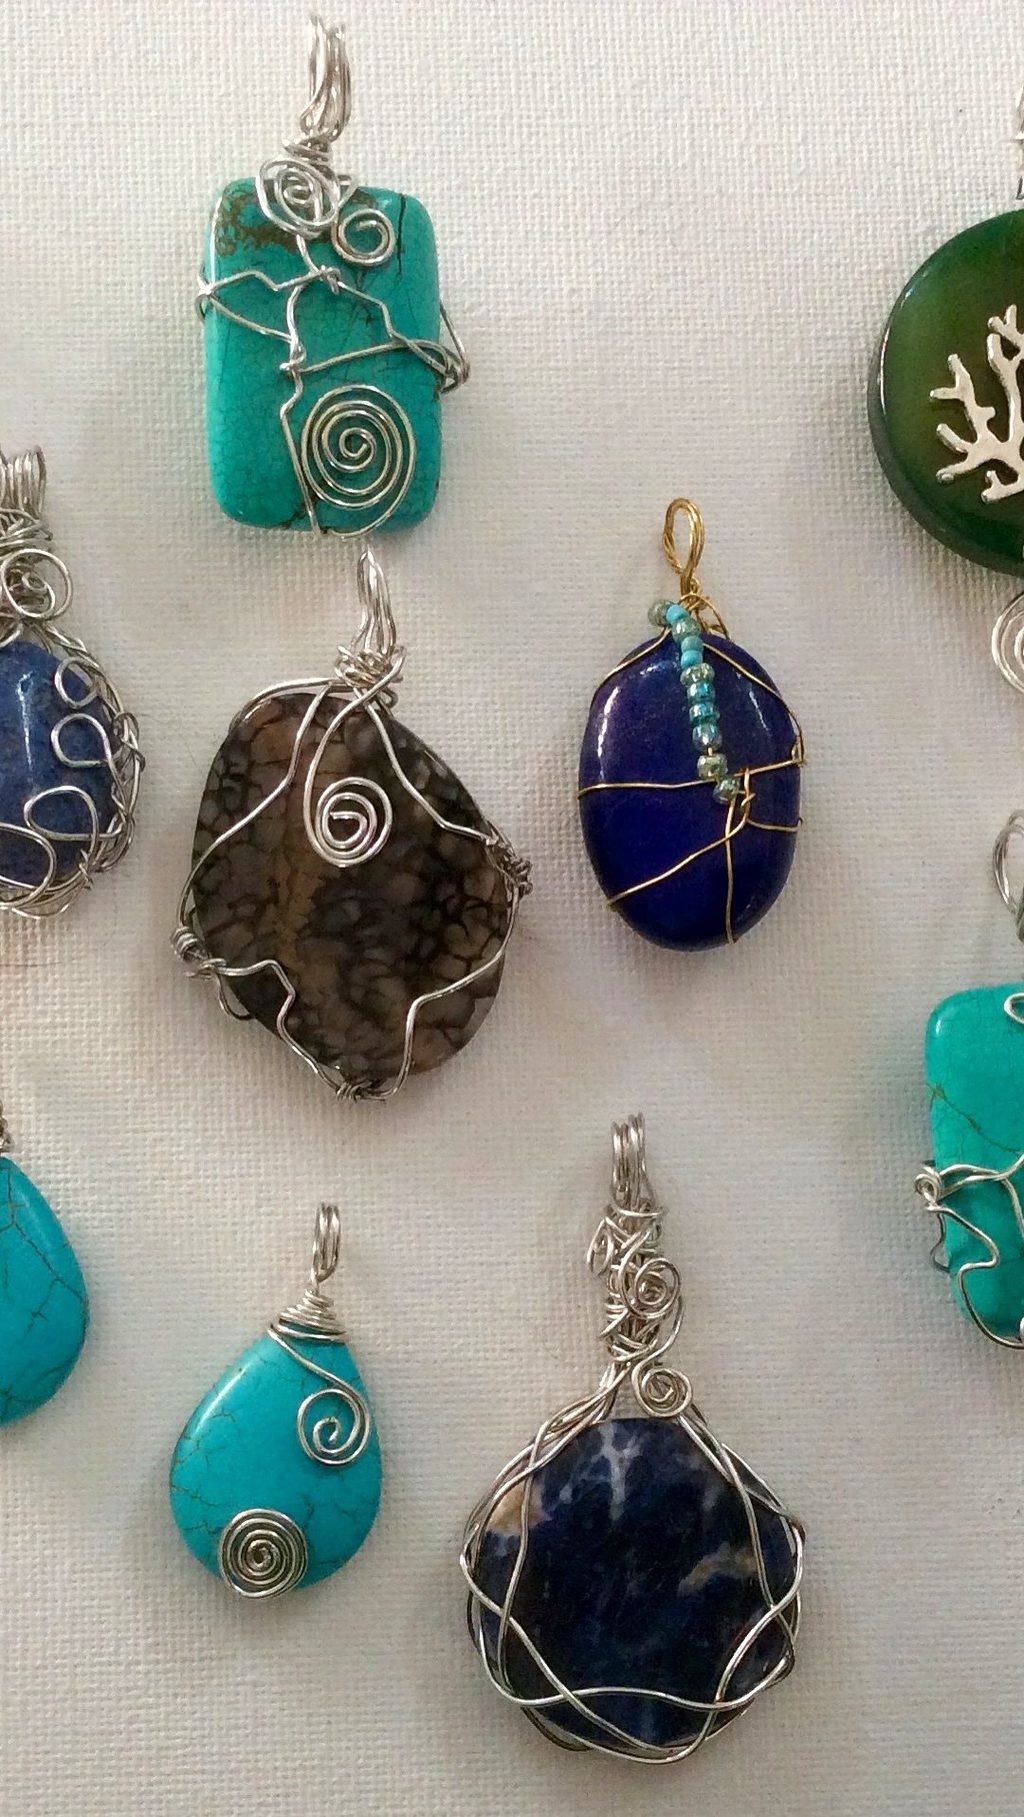 Wire wrapping joy and so much more